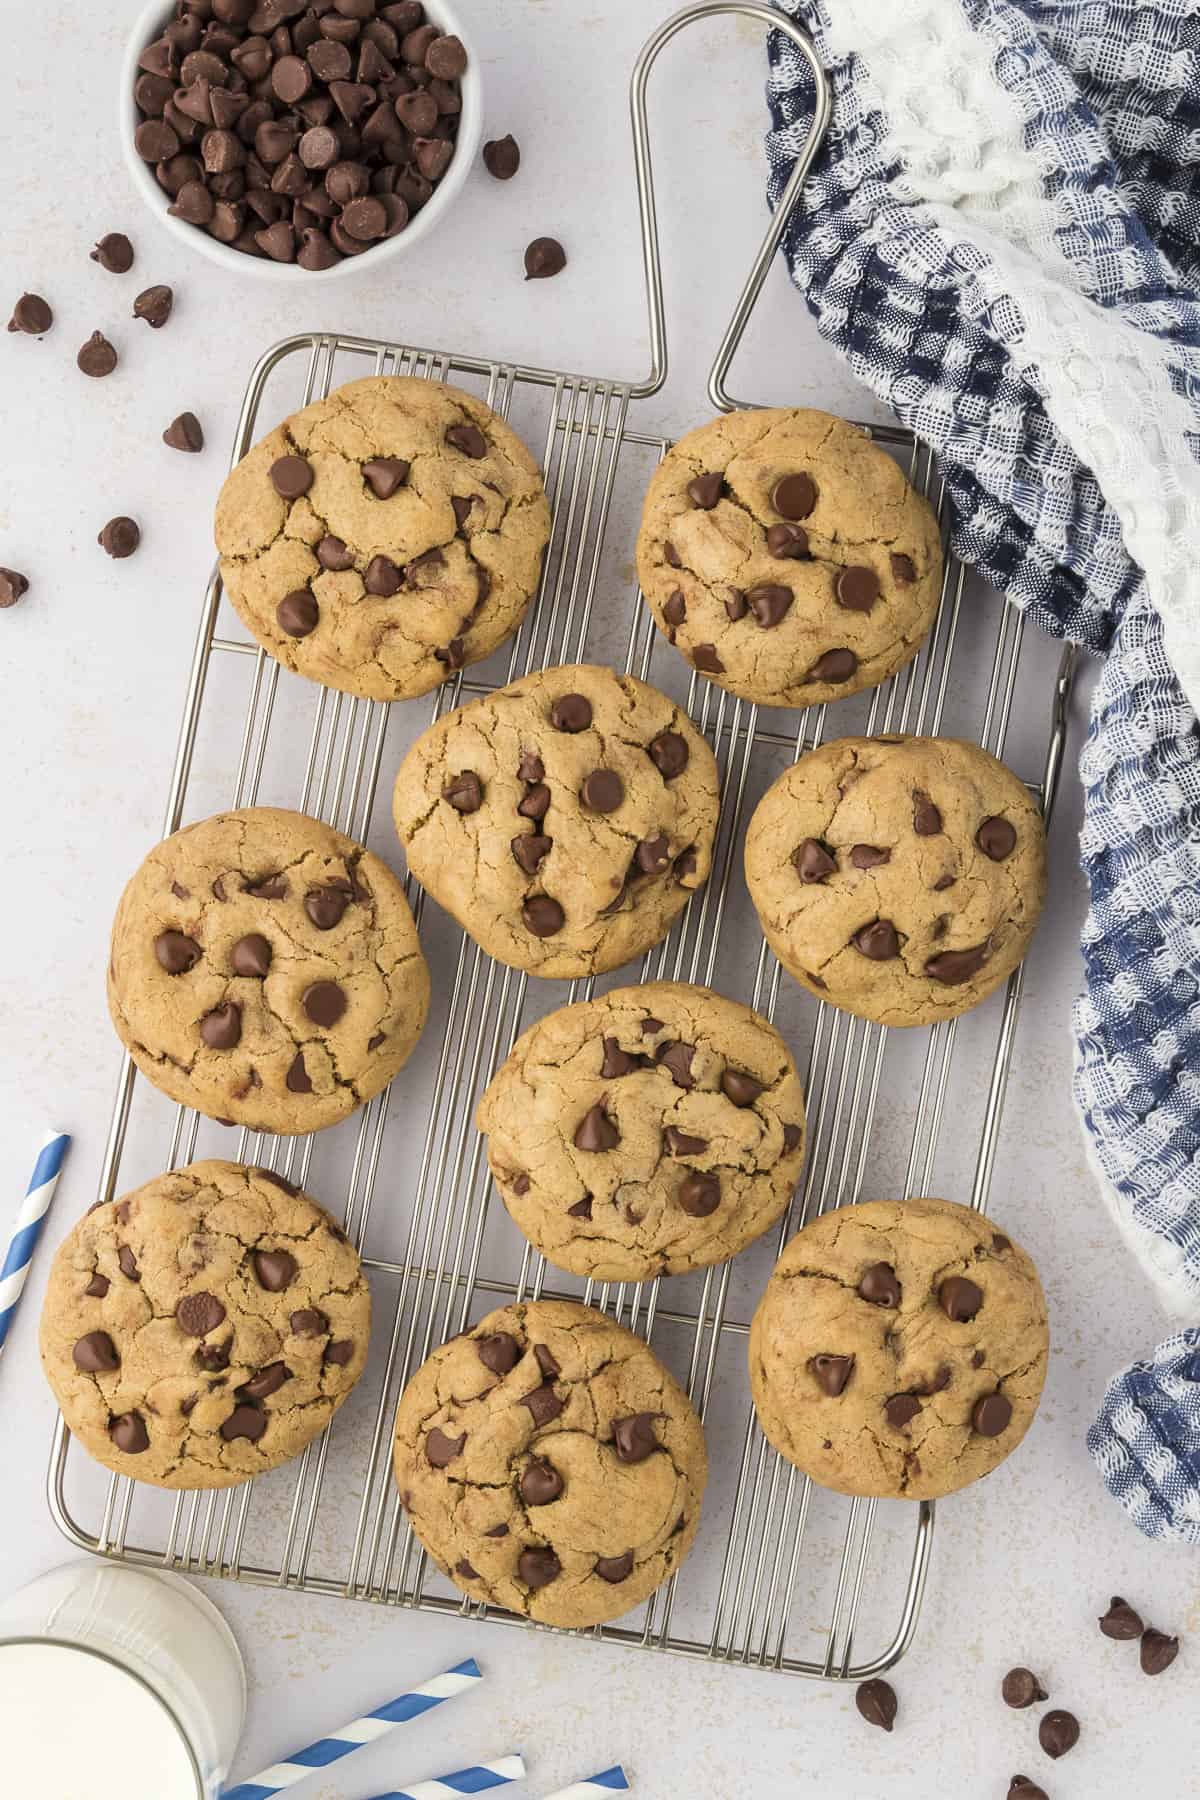 Perfect chocolate chip cookies cooling on rack.